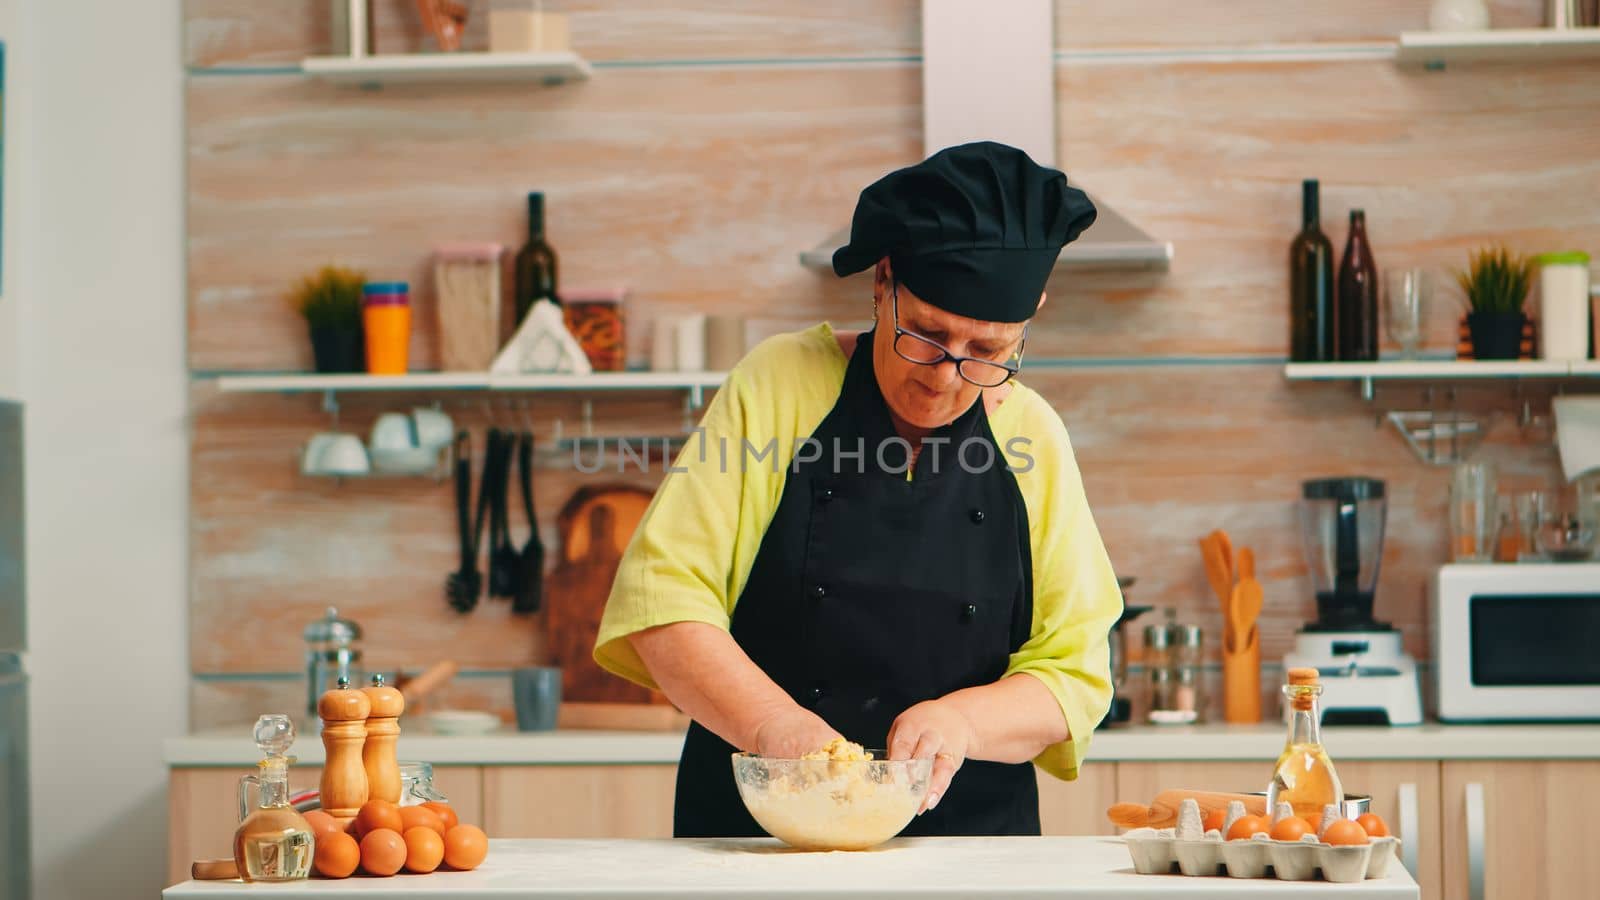 Woman wearing chef bonete while mixing cracked eggs with flour in kitchen while preparing food following traditional recipe. Retired elderly baker kneading in glass bowl ingredients for homemade cake